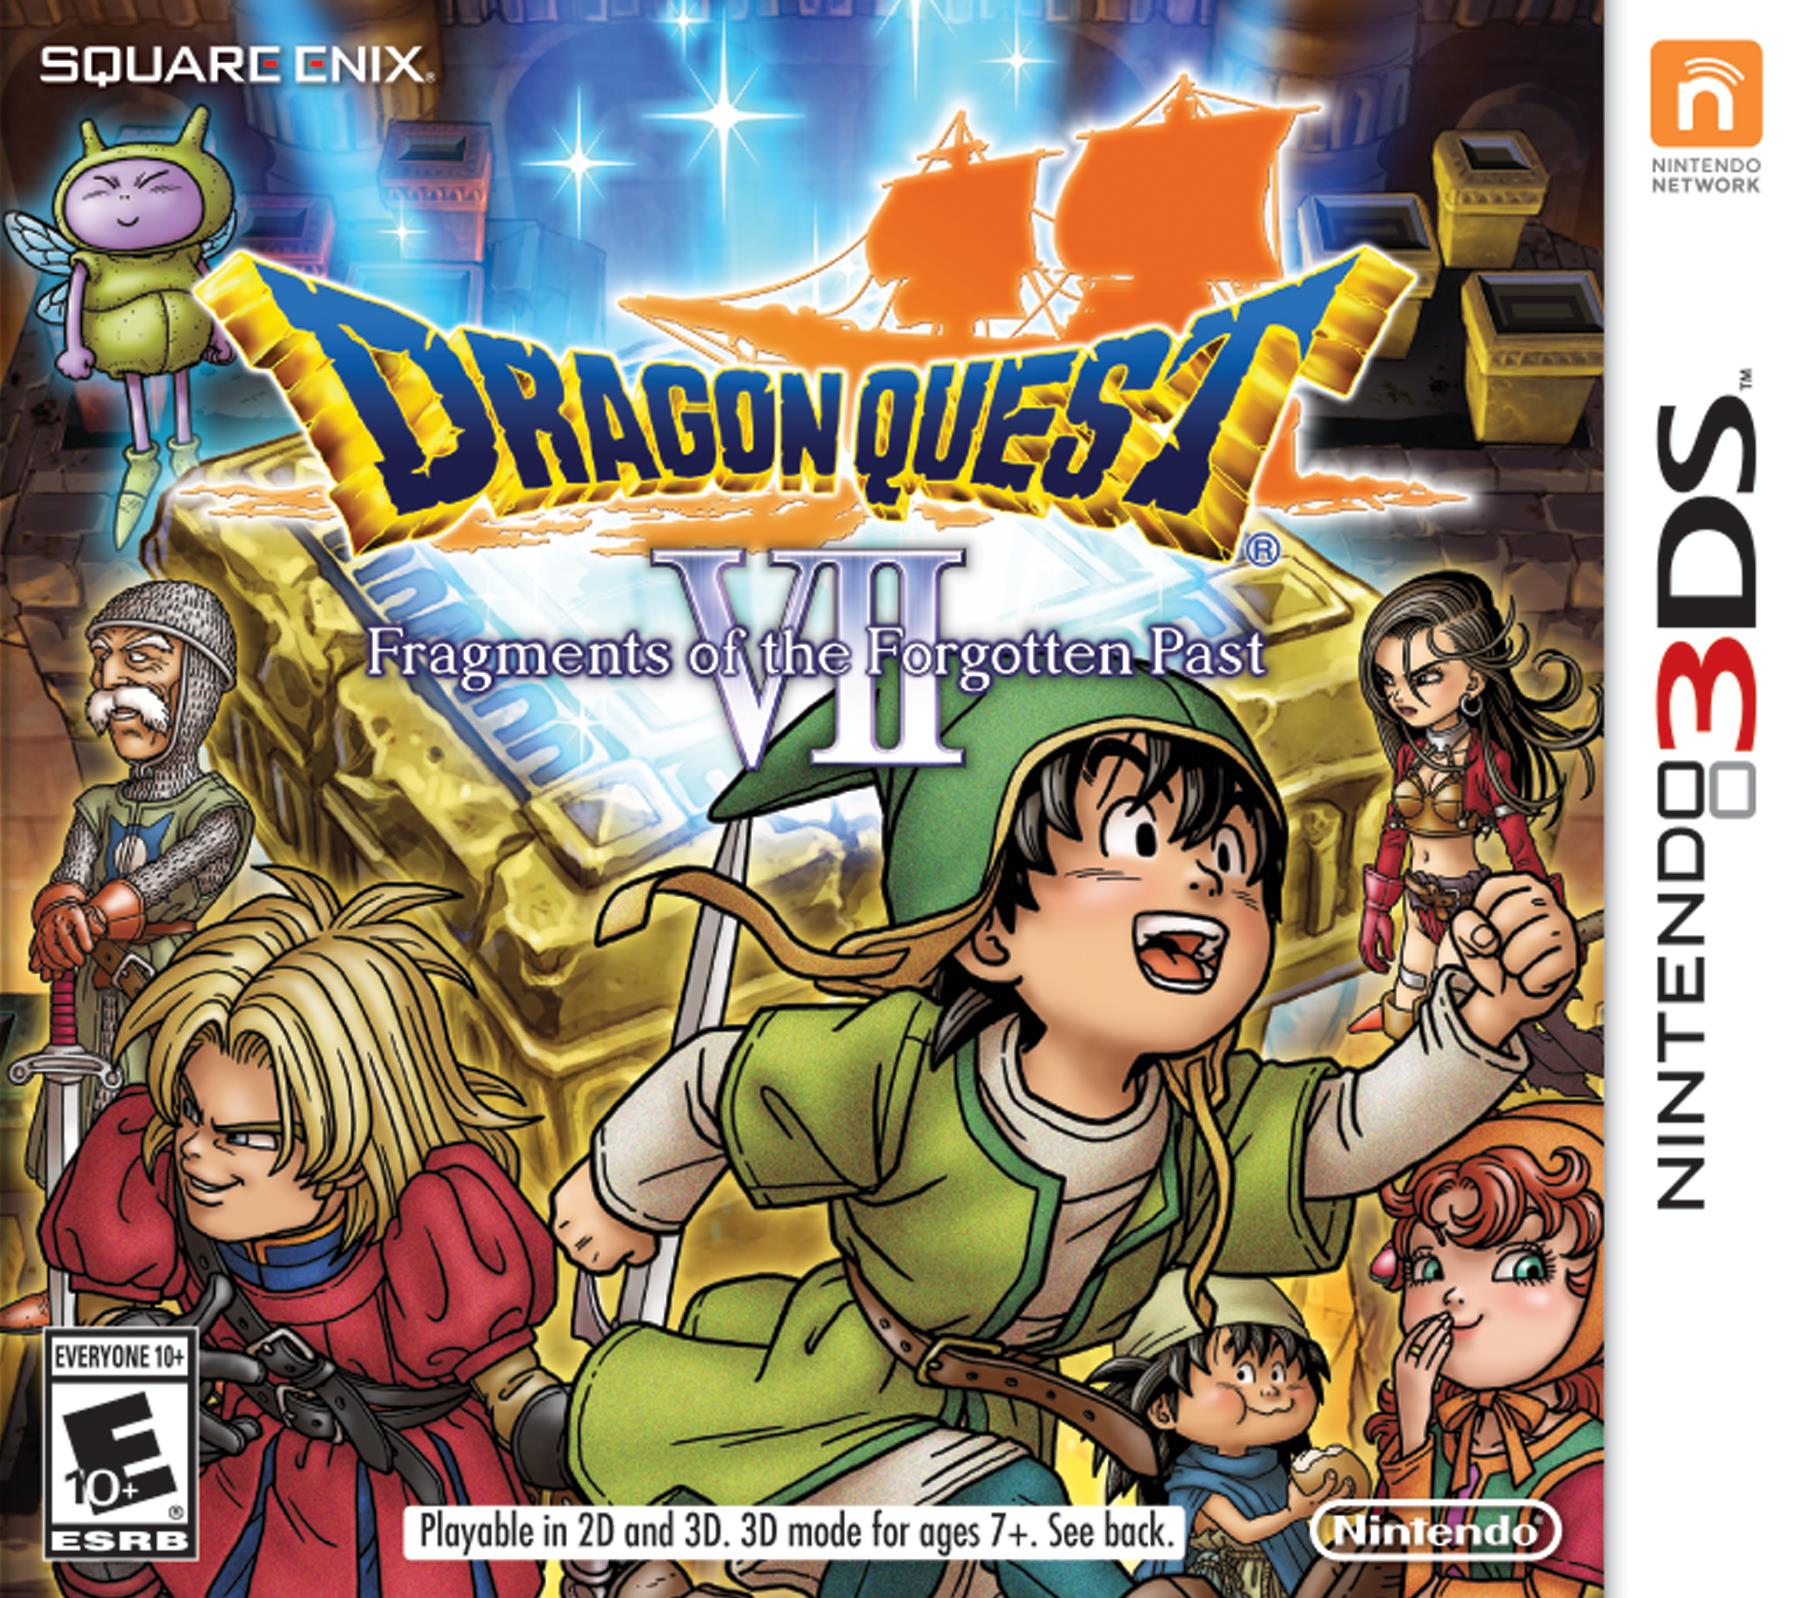 Dragon Quest VII: Fragments of the Forgotten Past, Nintendo, Nintendo 3DS, 045496743703 - image 1 of 1